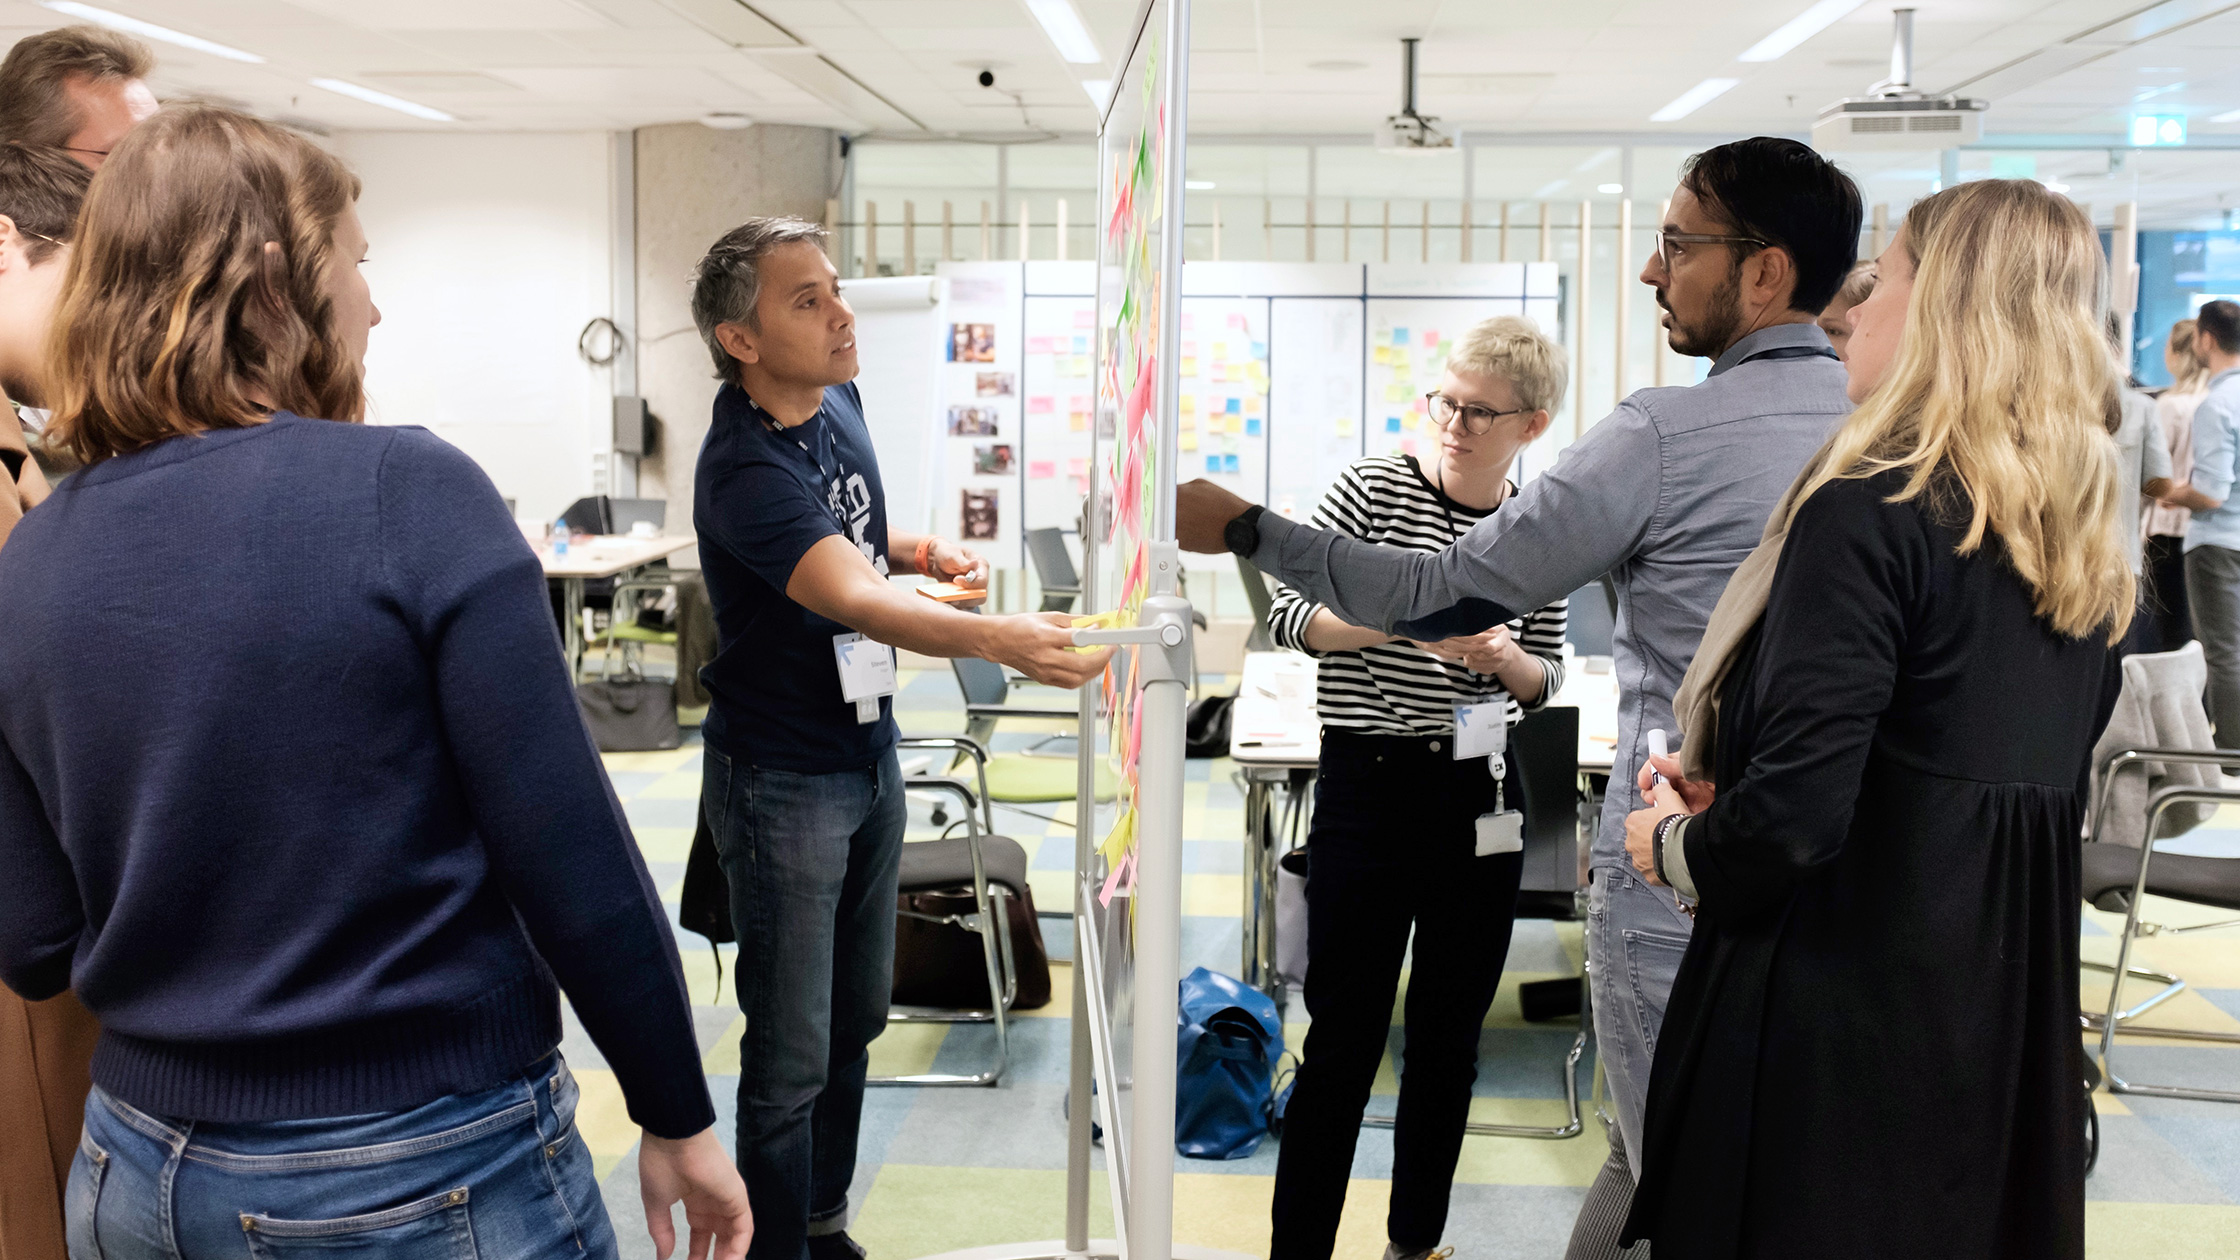 Employees work with design thinking on a board